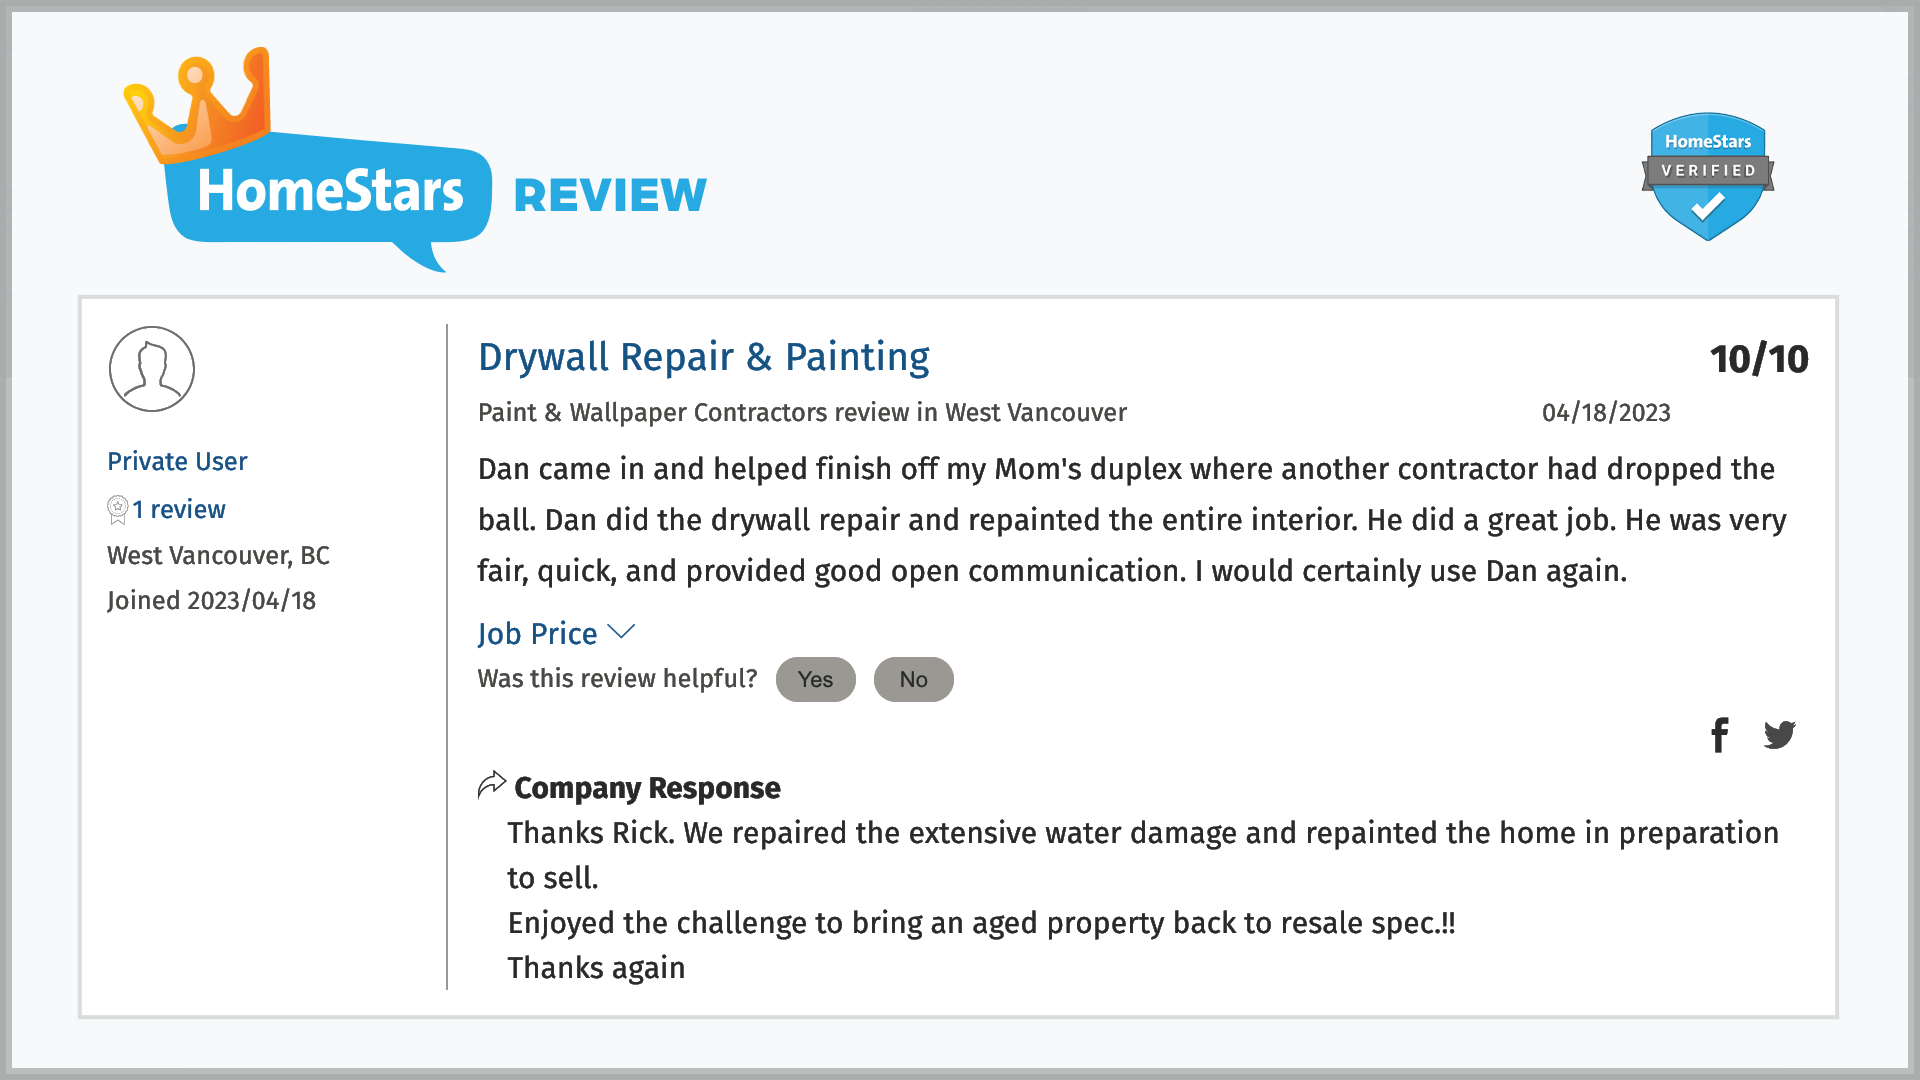 homestars-review-10-out-of-10-drywall-repairman-vancouver-bc-canada-12